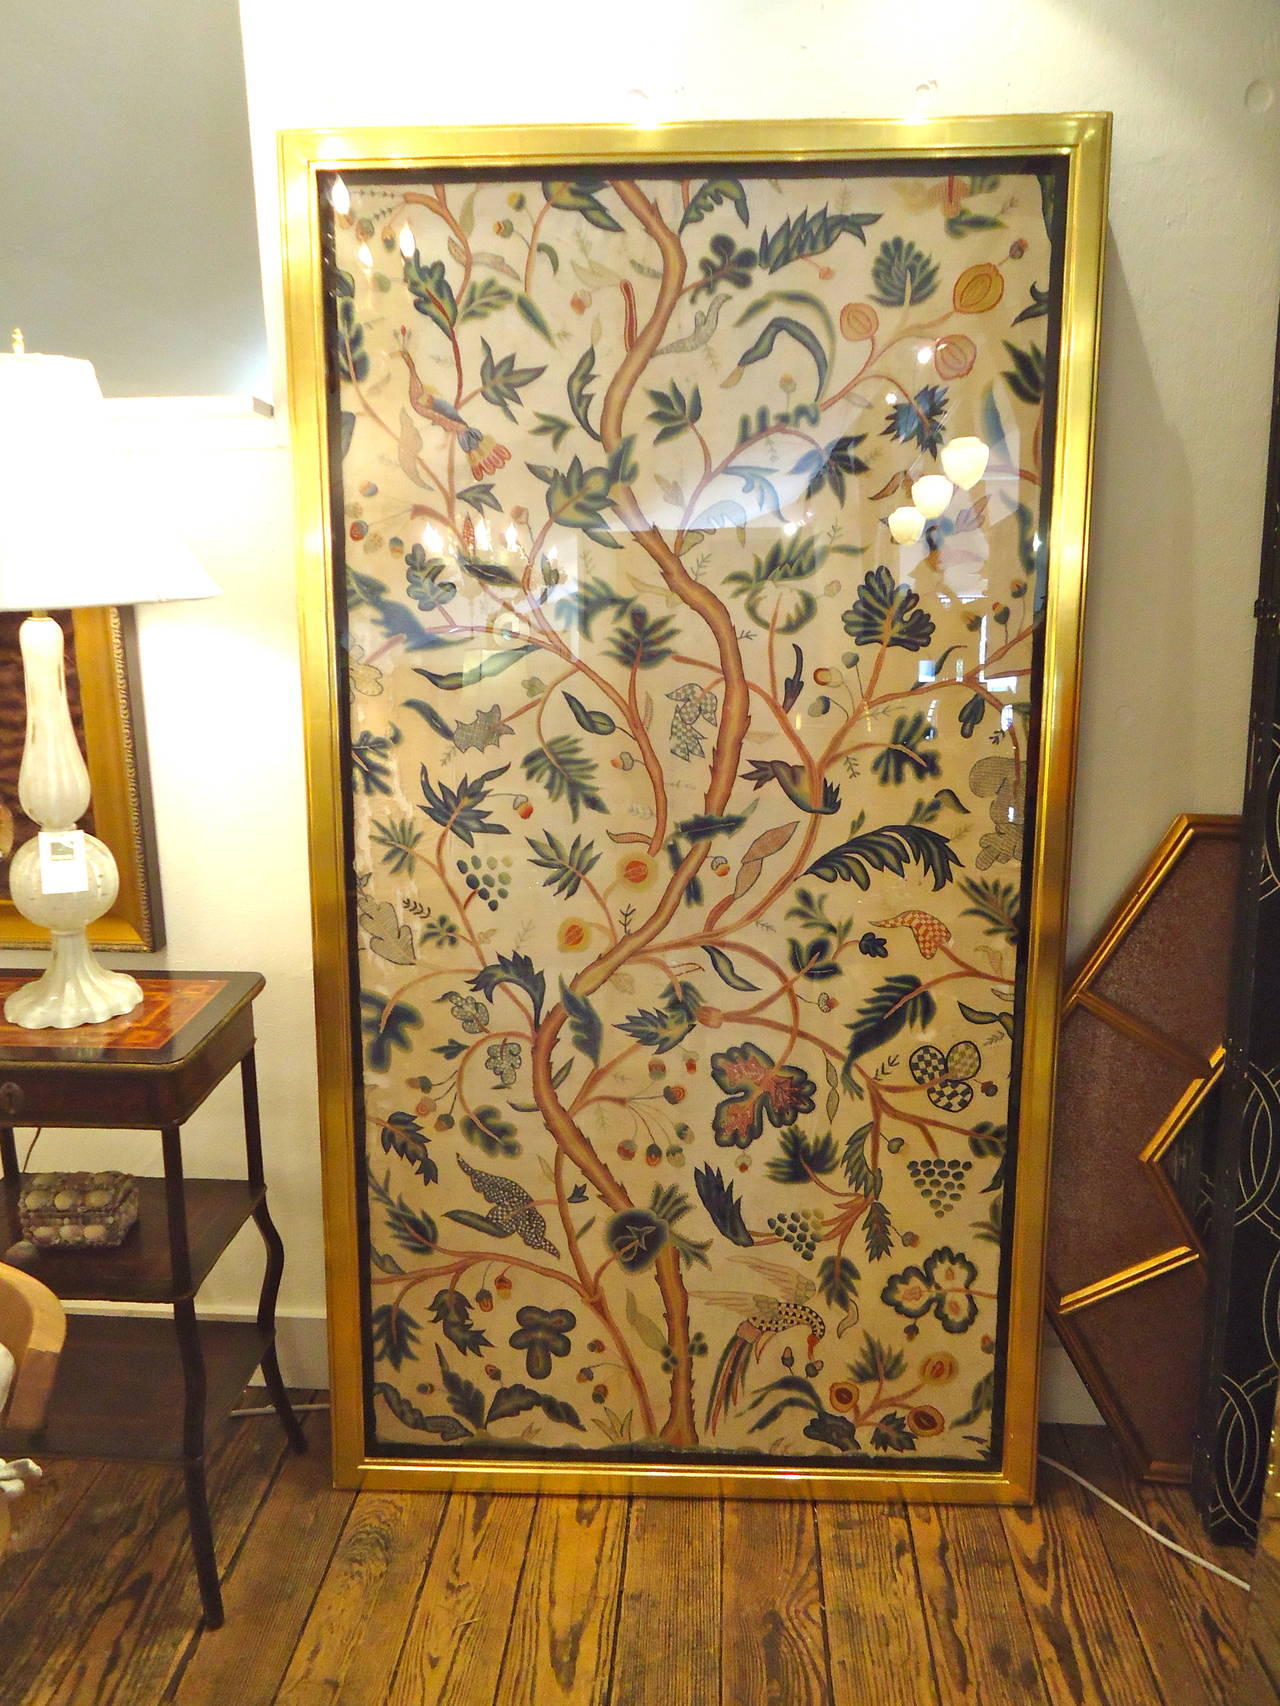 Two richly embroidered antique English bed panels probably based on an oriental representation of the tree of life with twisted branches, curling leaves, and exotic birds. The design was most likely also inspired in part by Verdure tapestries. While